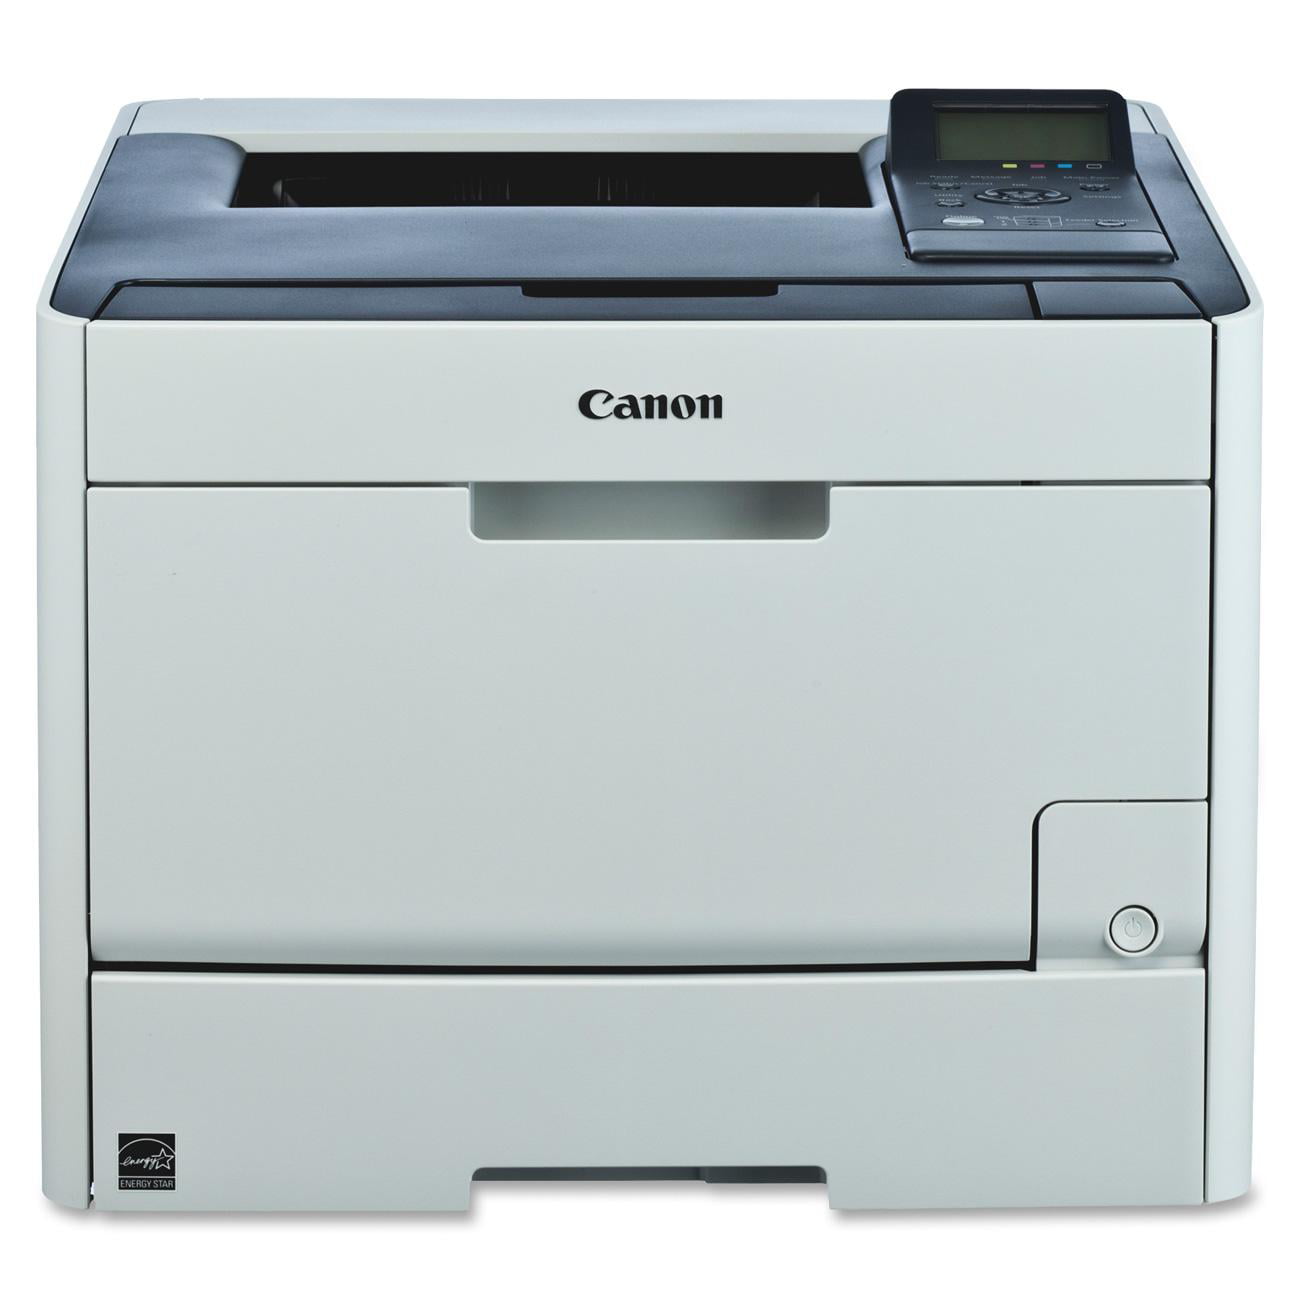 Copier & Fax Canon Office Products MF628Cw imageCLASS Wireless Color Printer with Scanner